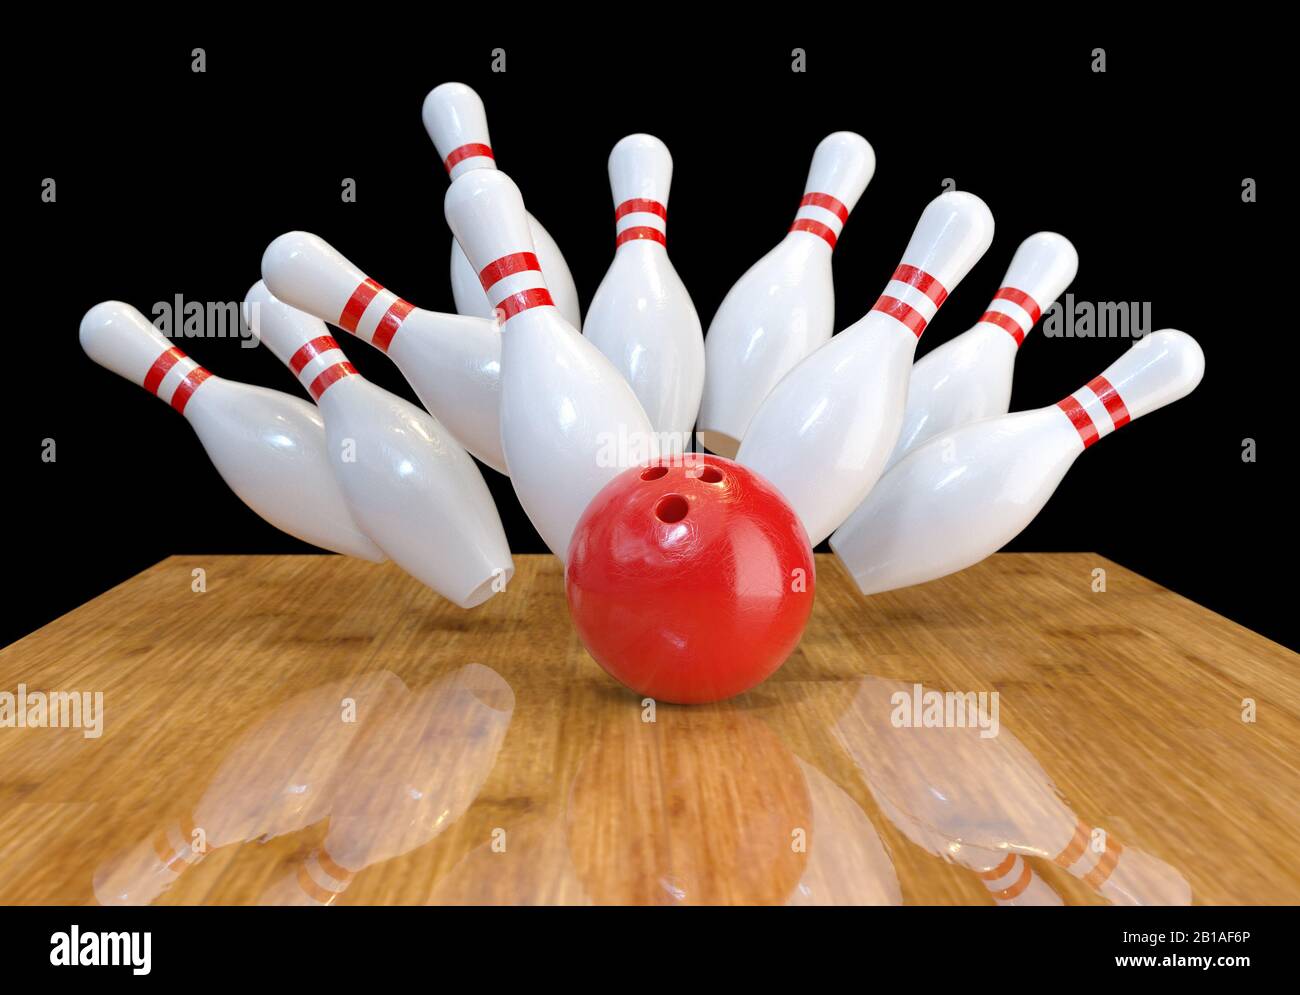 Image of scattered skittles and bowling ball on wooden floor, 3d rendering. Stock Photo